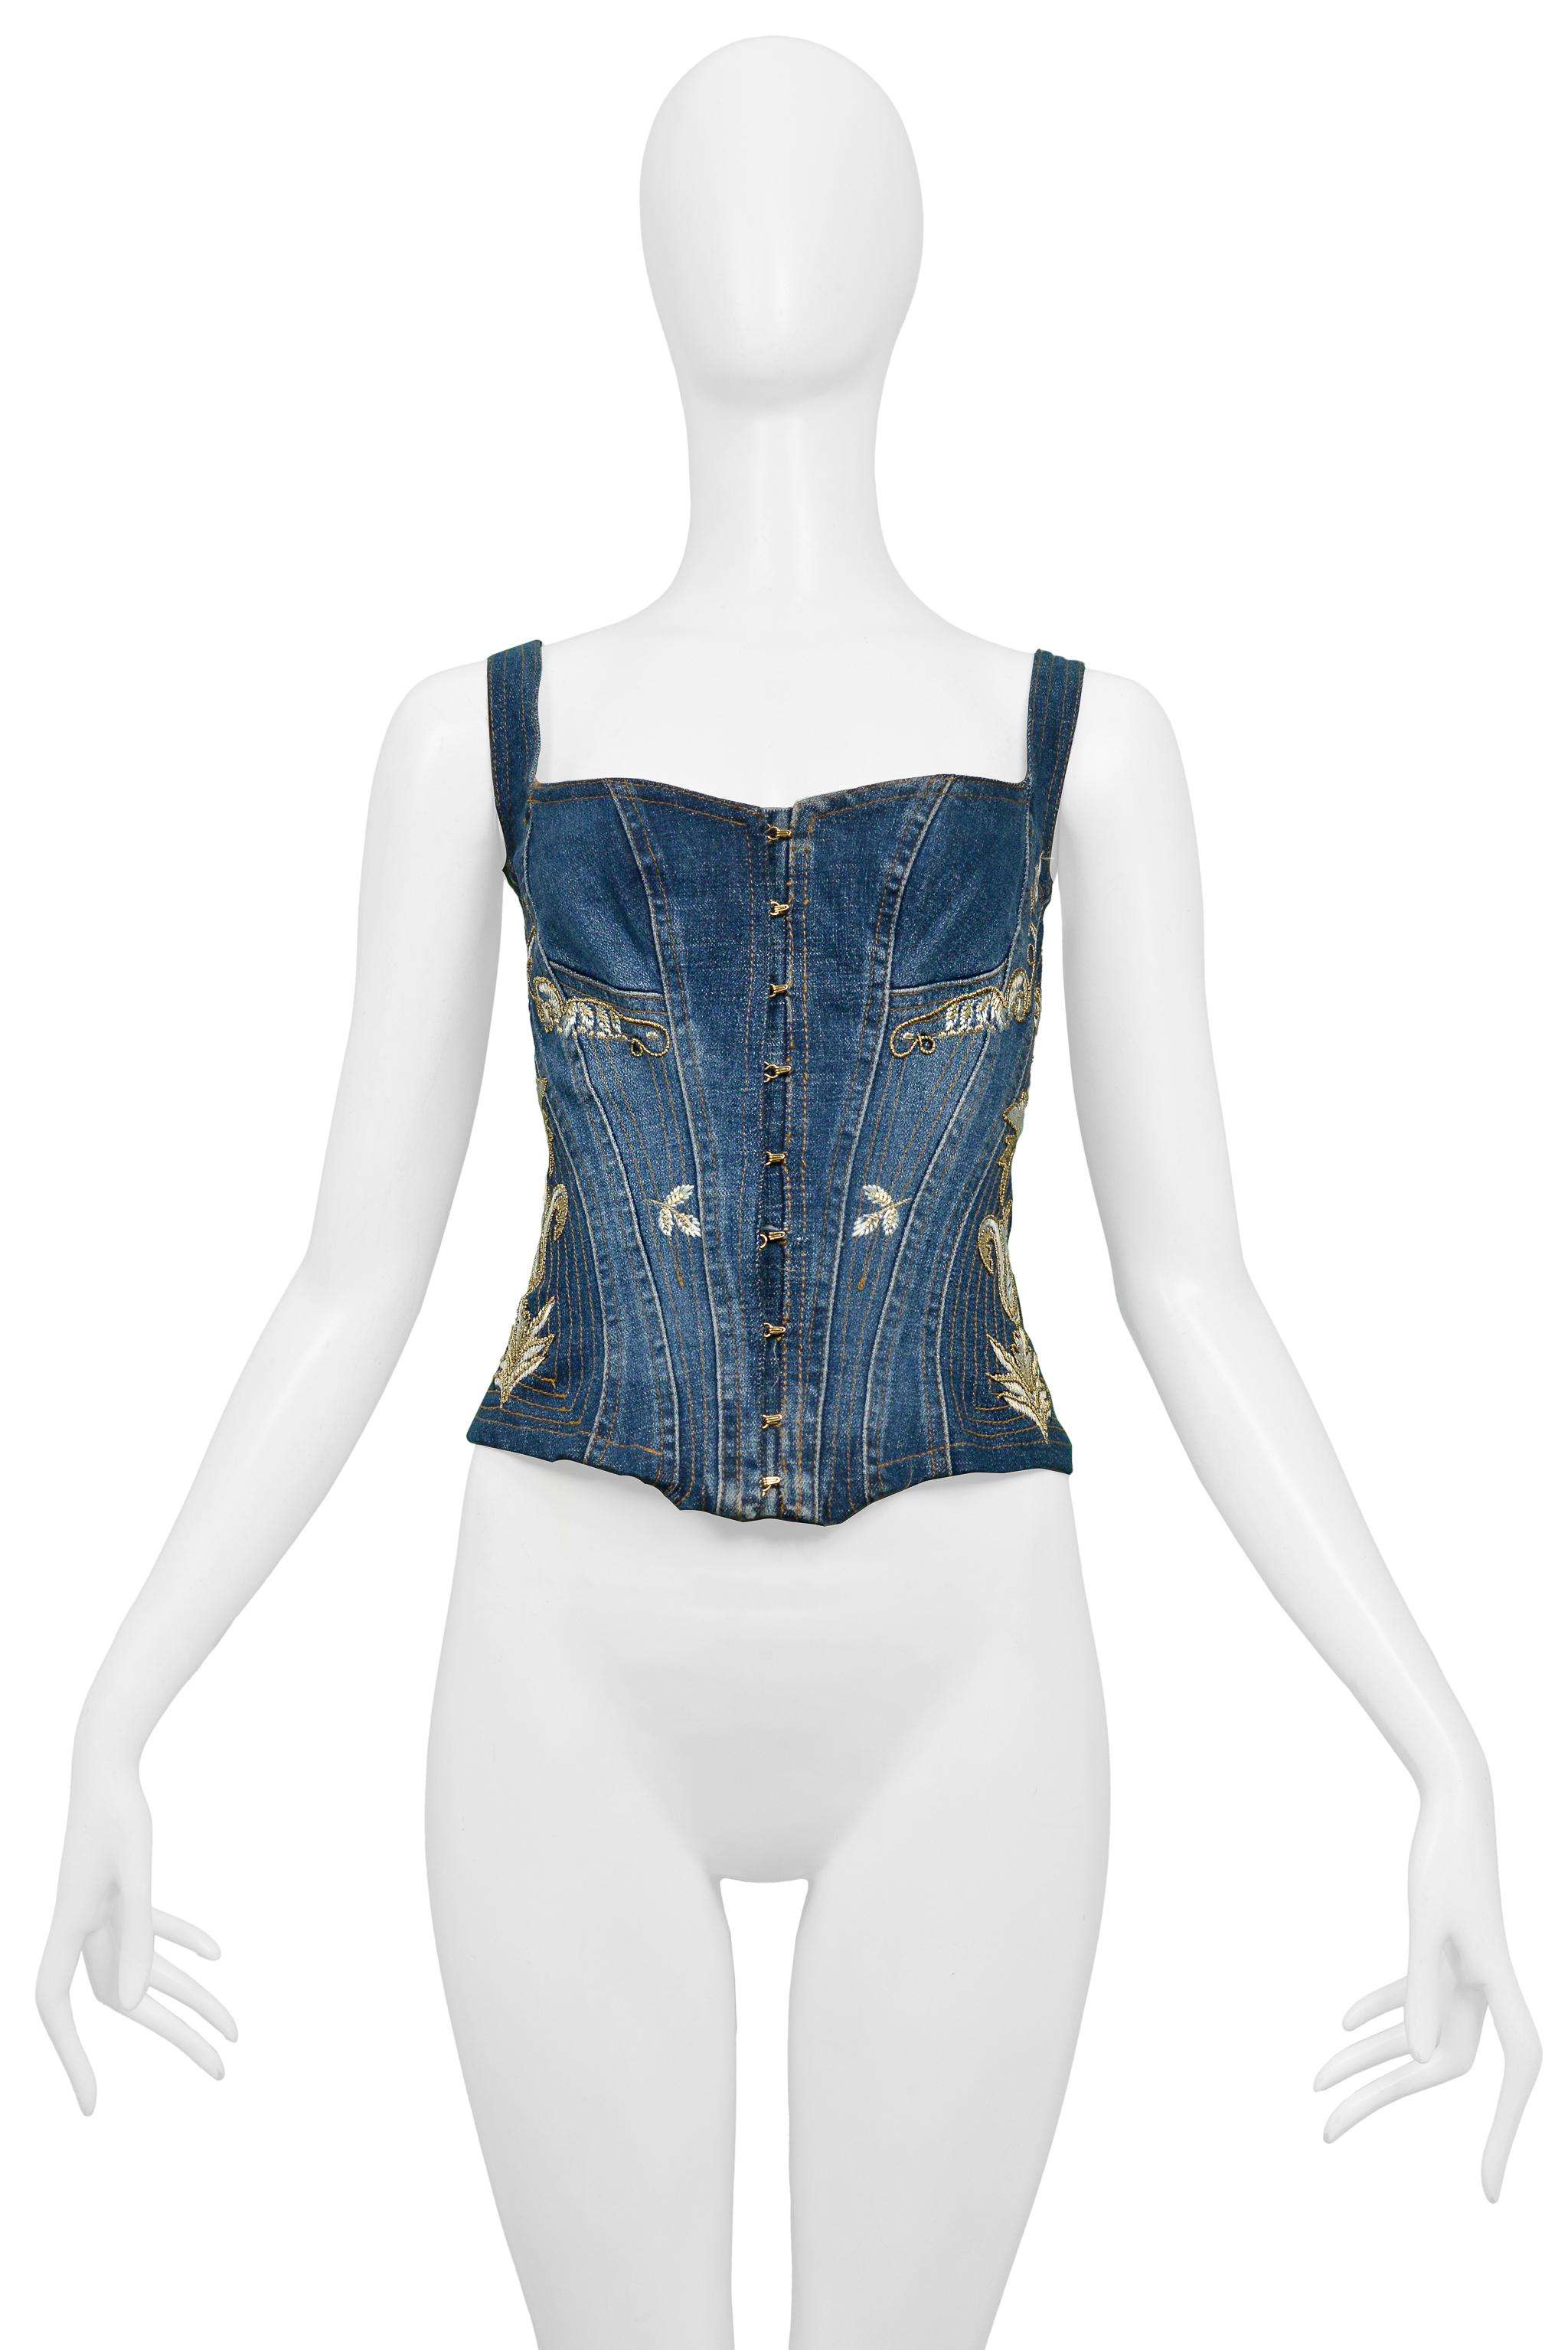 Resurrection Vintage is excited to present a vintage Roberto Cavalli denim corset top featuring gold-tone hooks and eye closures, bustier detailing at bust, gold stitching, gold embroidery, and a lace-up corset detail at the center back. 

Roberto